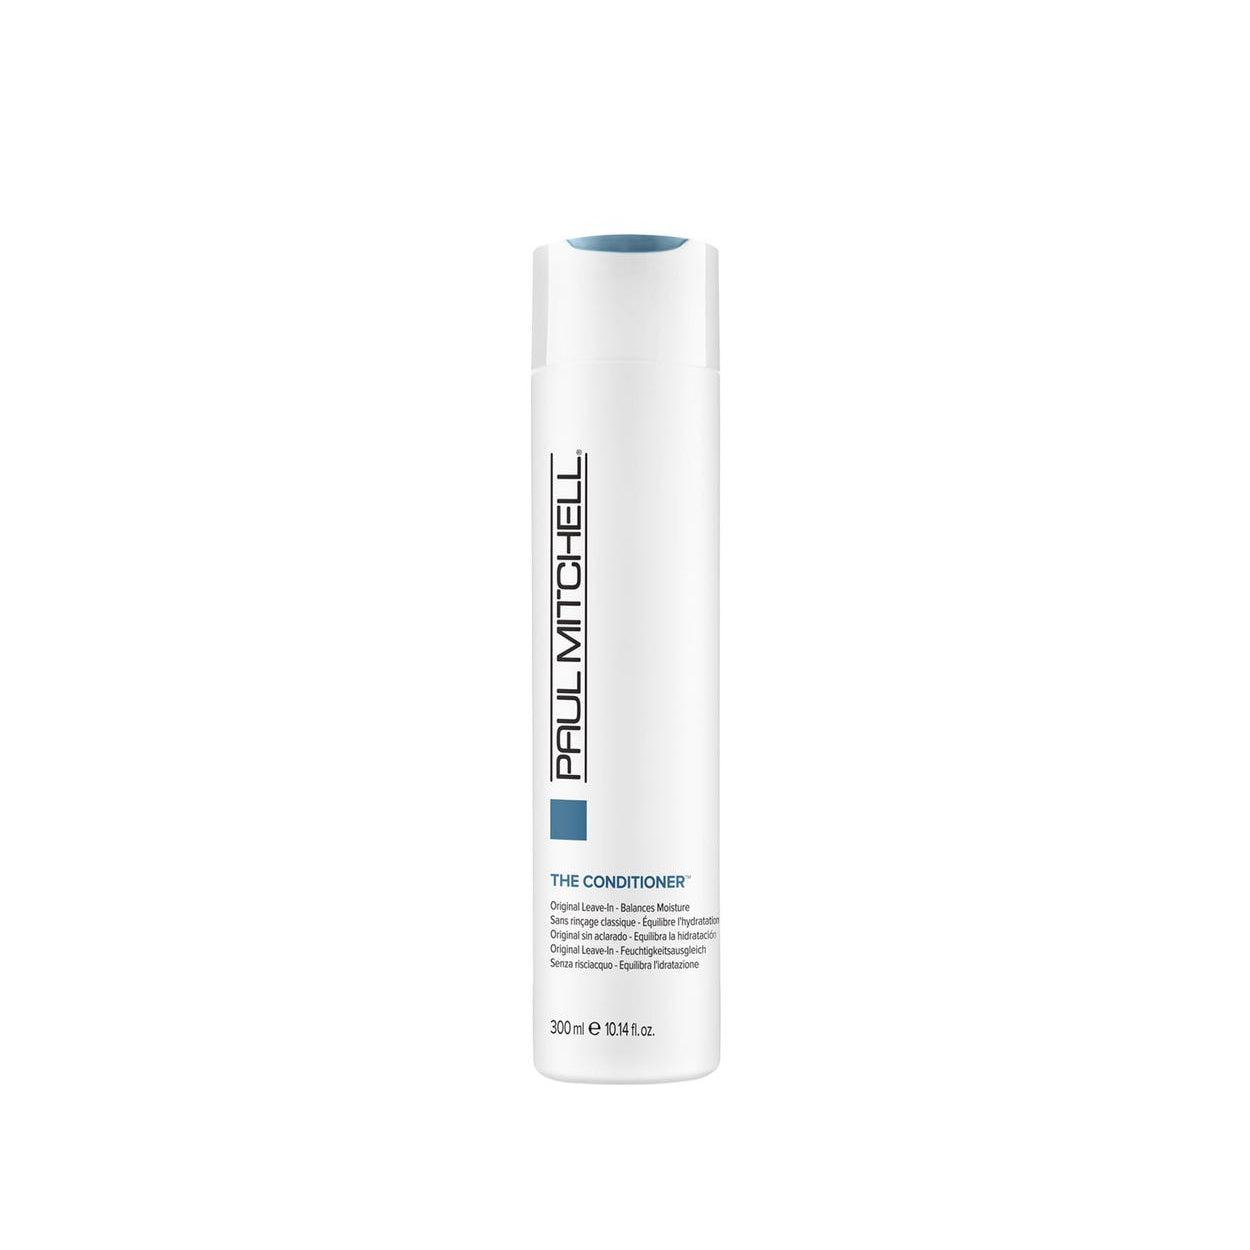 Paul Mitchell the conditioner 300ml